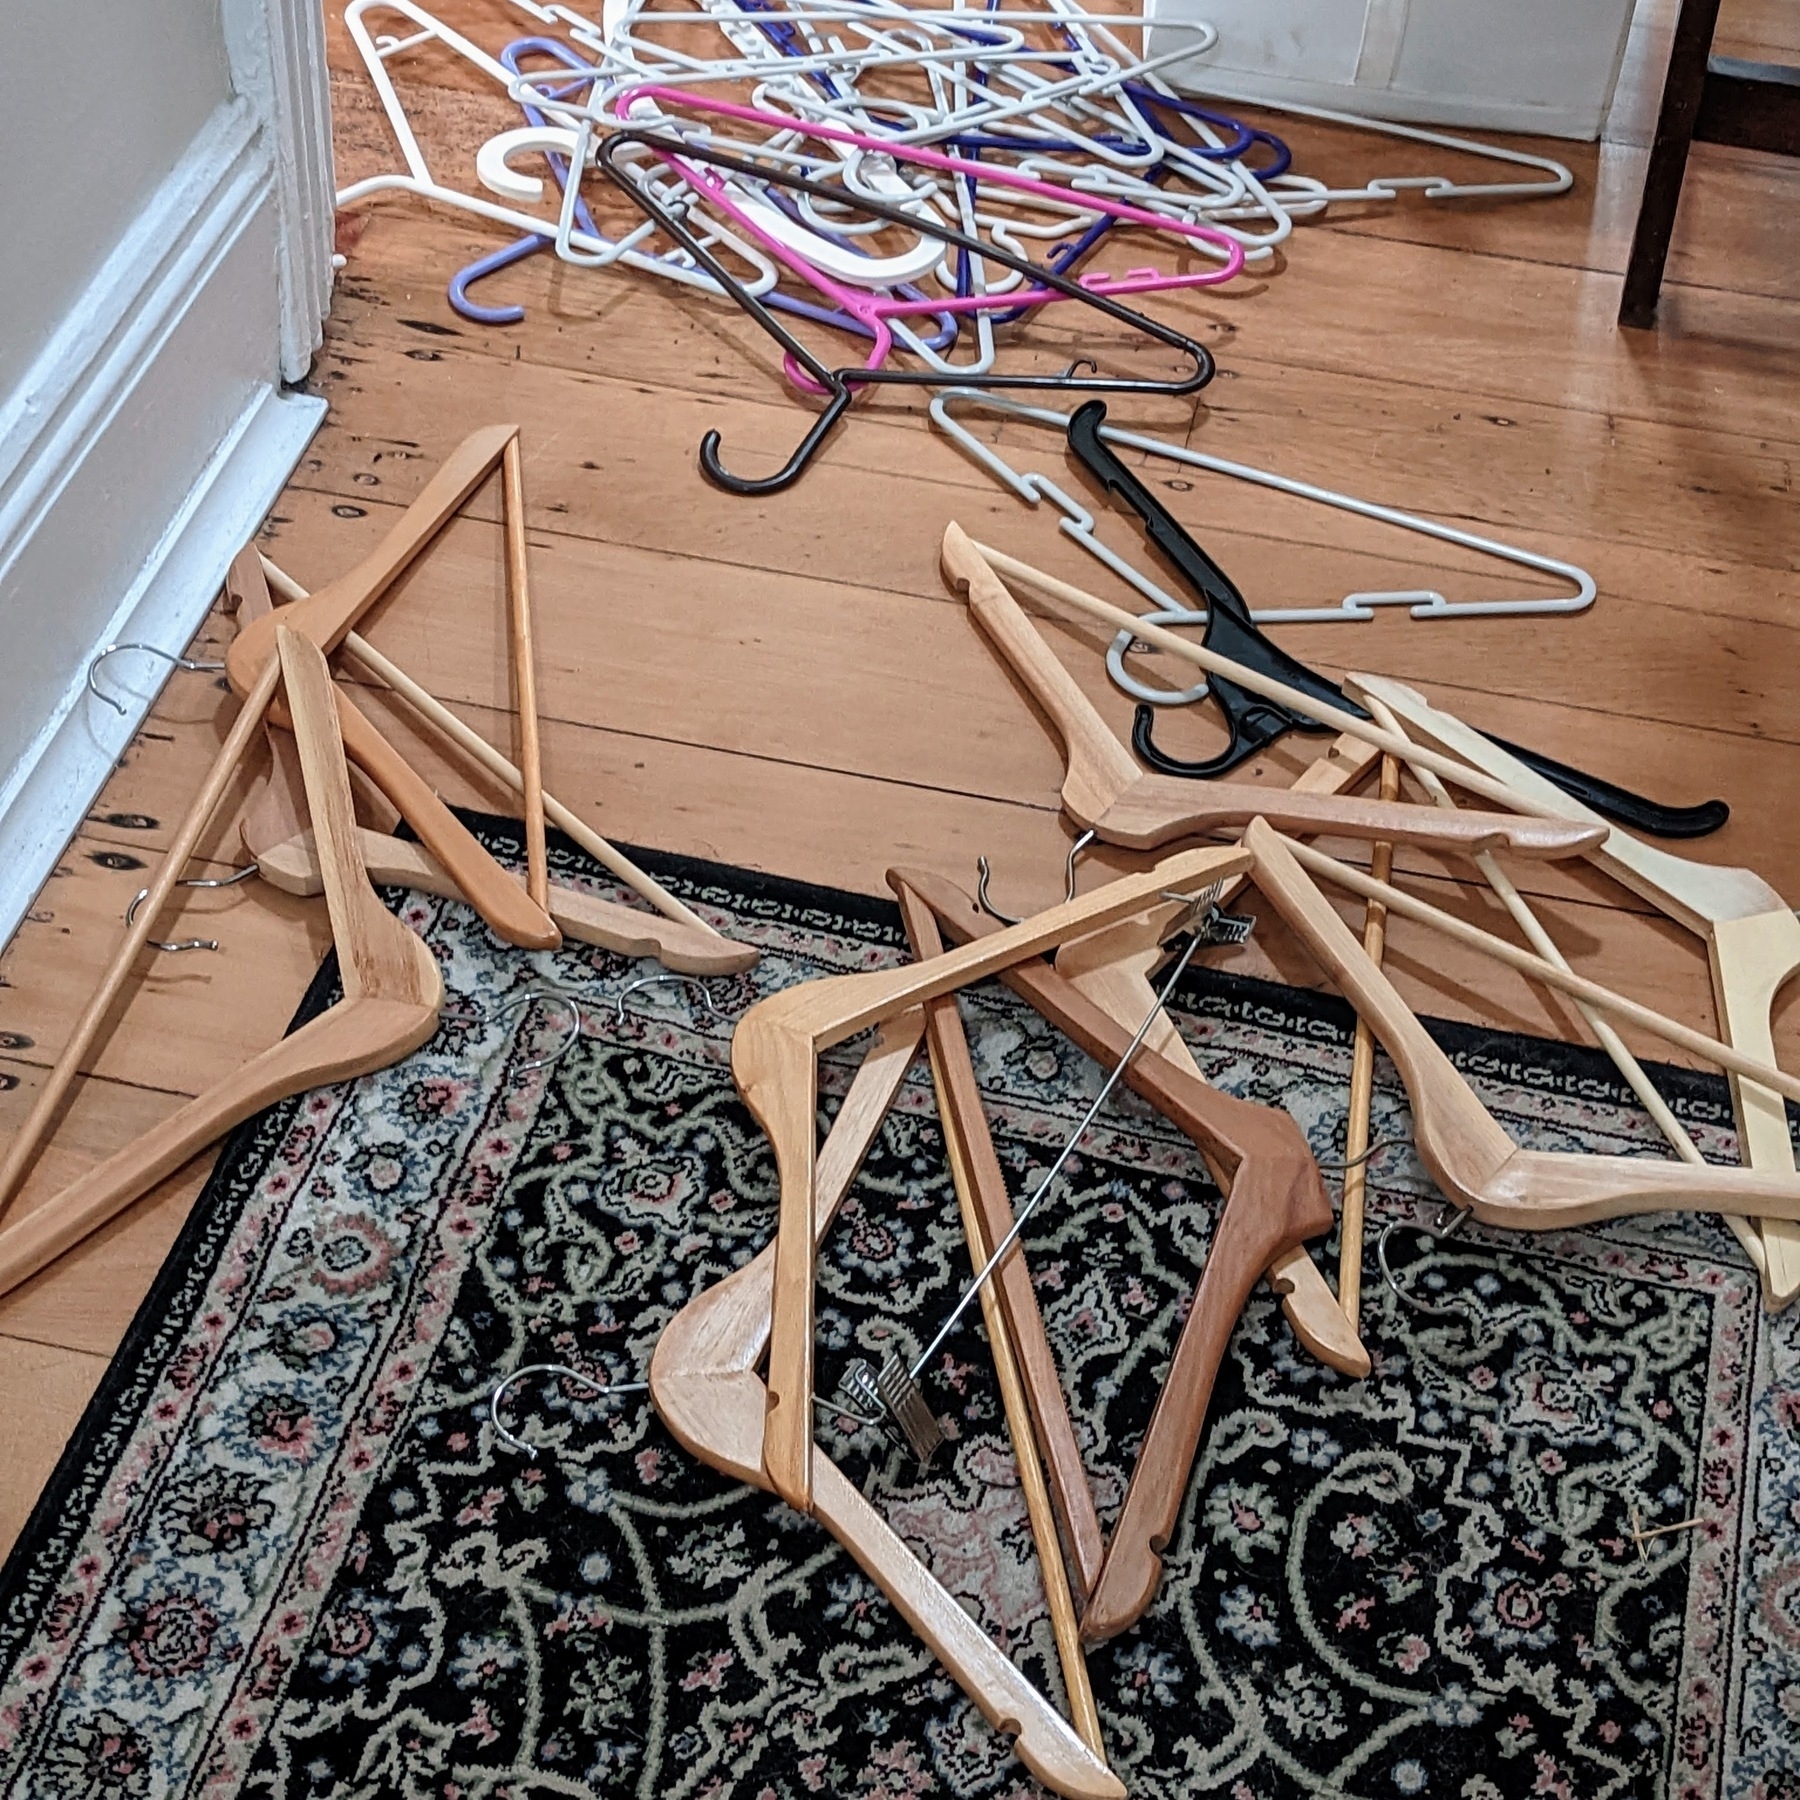 Coat-hangers are strewn about the wooden floor, with a rug in the foreground.